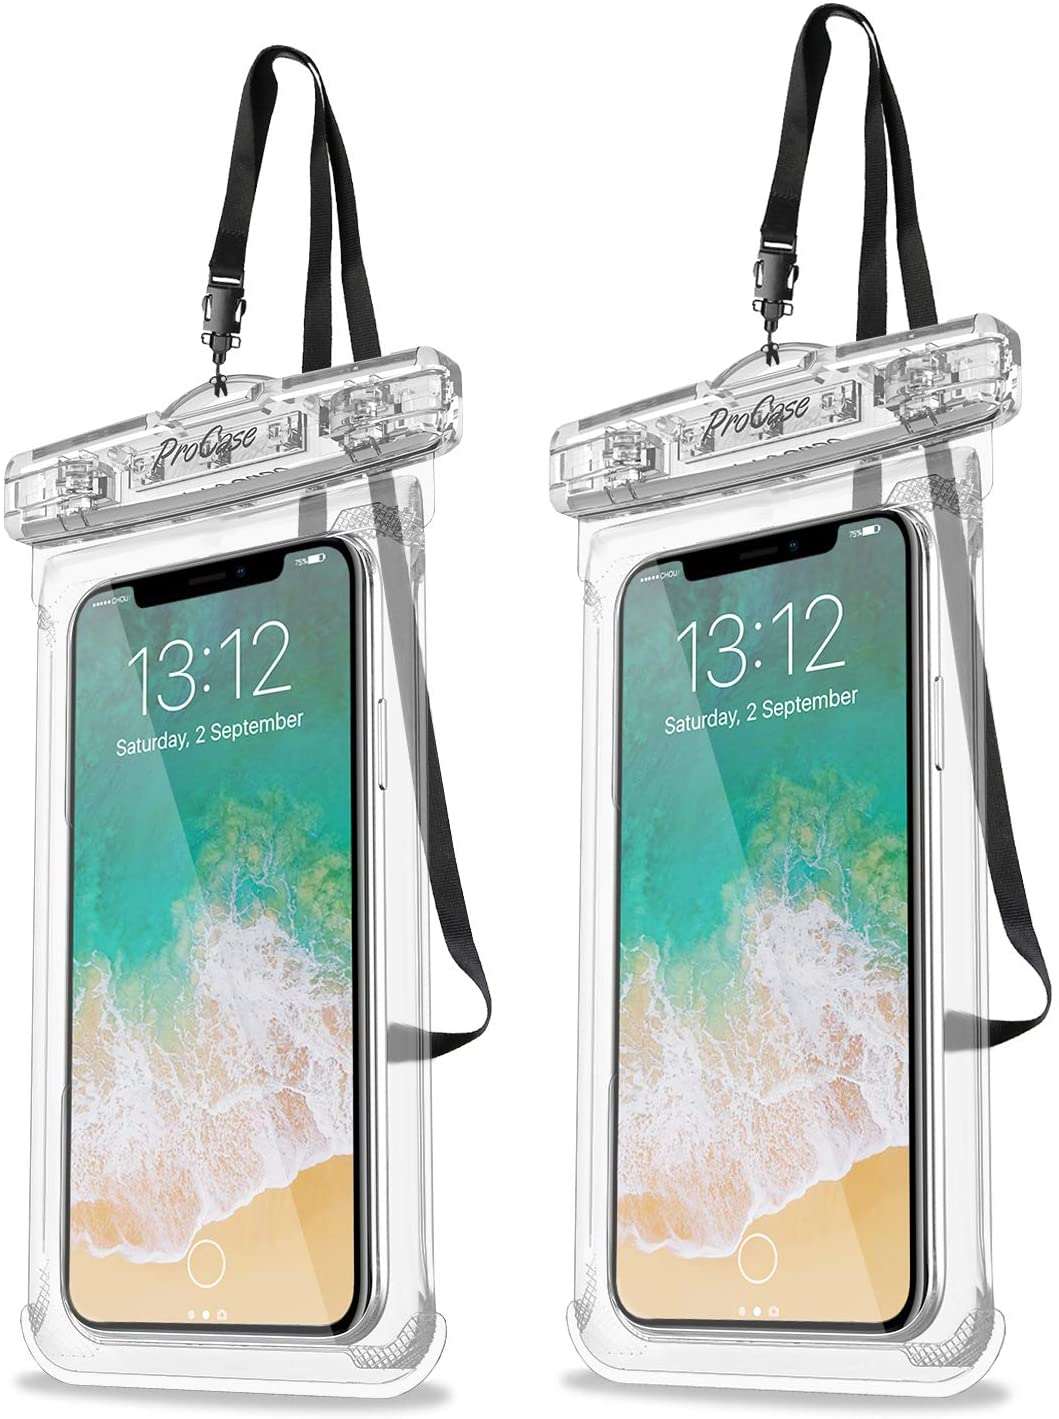 Universal Waterproof Pouch Phone Dry Bag - 2 Pack | ProCase clear